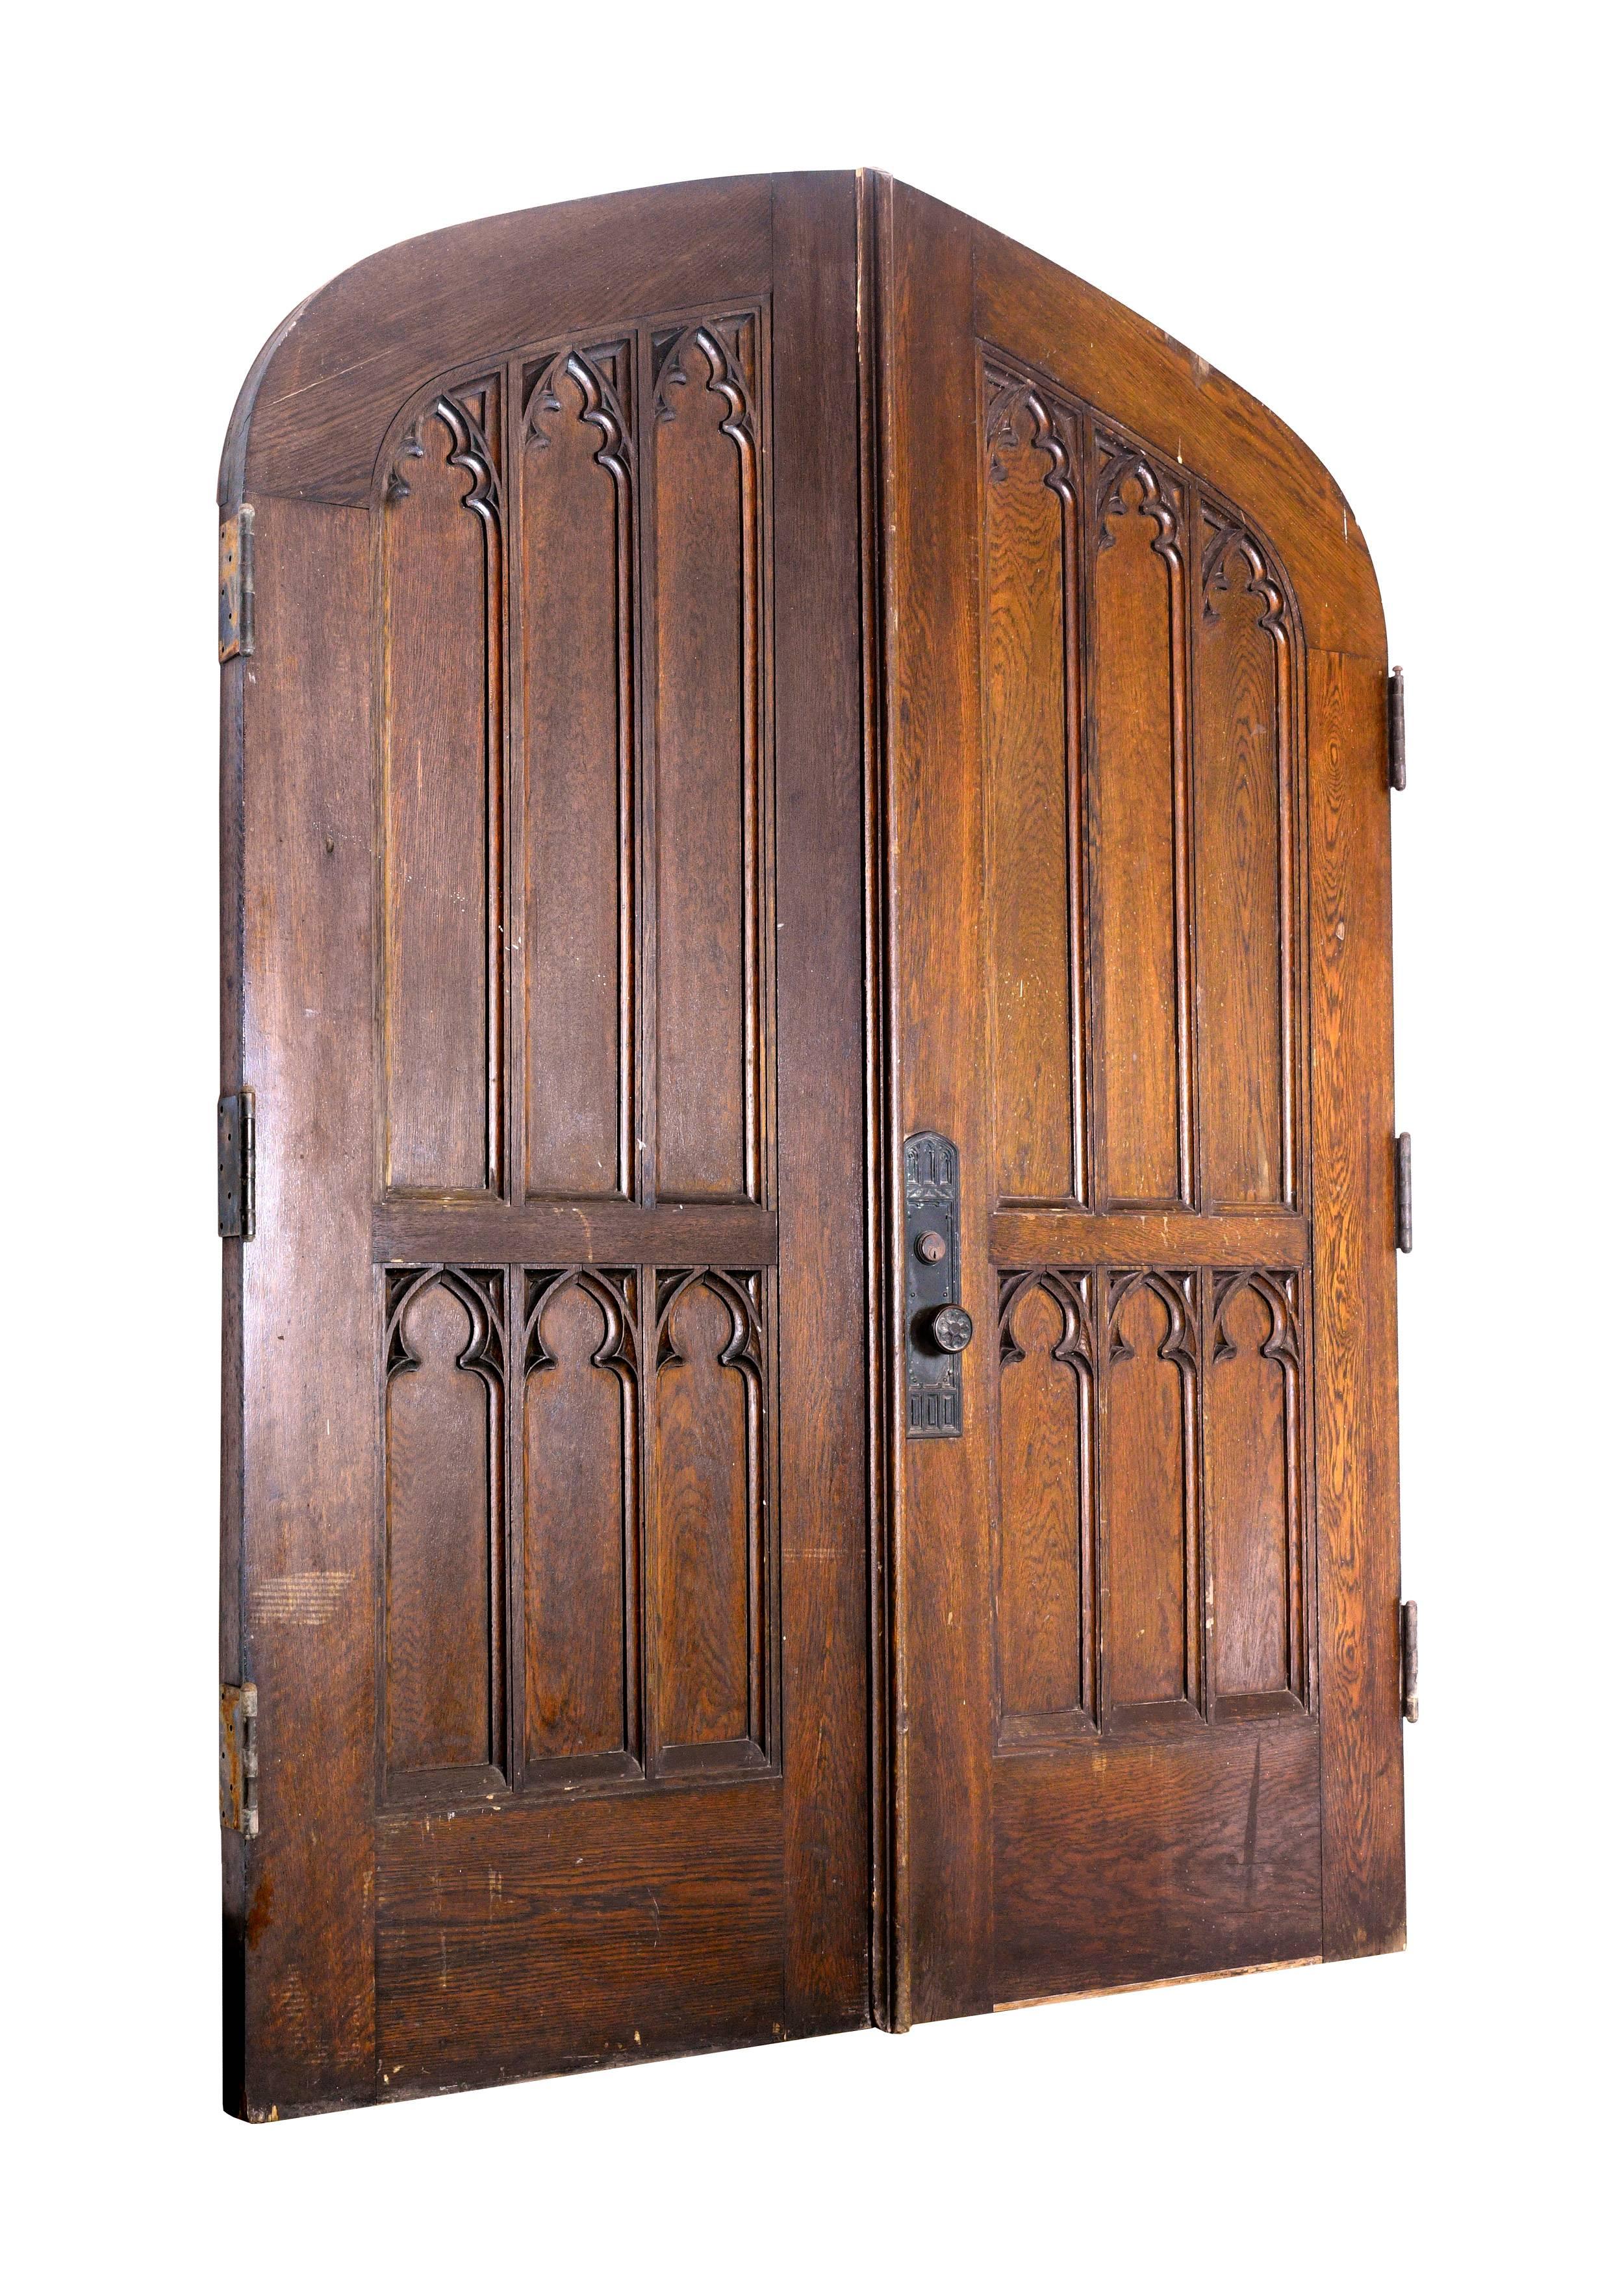 Stunning set of thick oak Gothic double doors with impeccably matching hardware. A low and wide depressed arch accents the elongated recessed panels adorned with trifoil designs. At nearly 3” thick, these doors are solid and built to last. Perfect